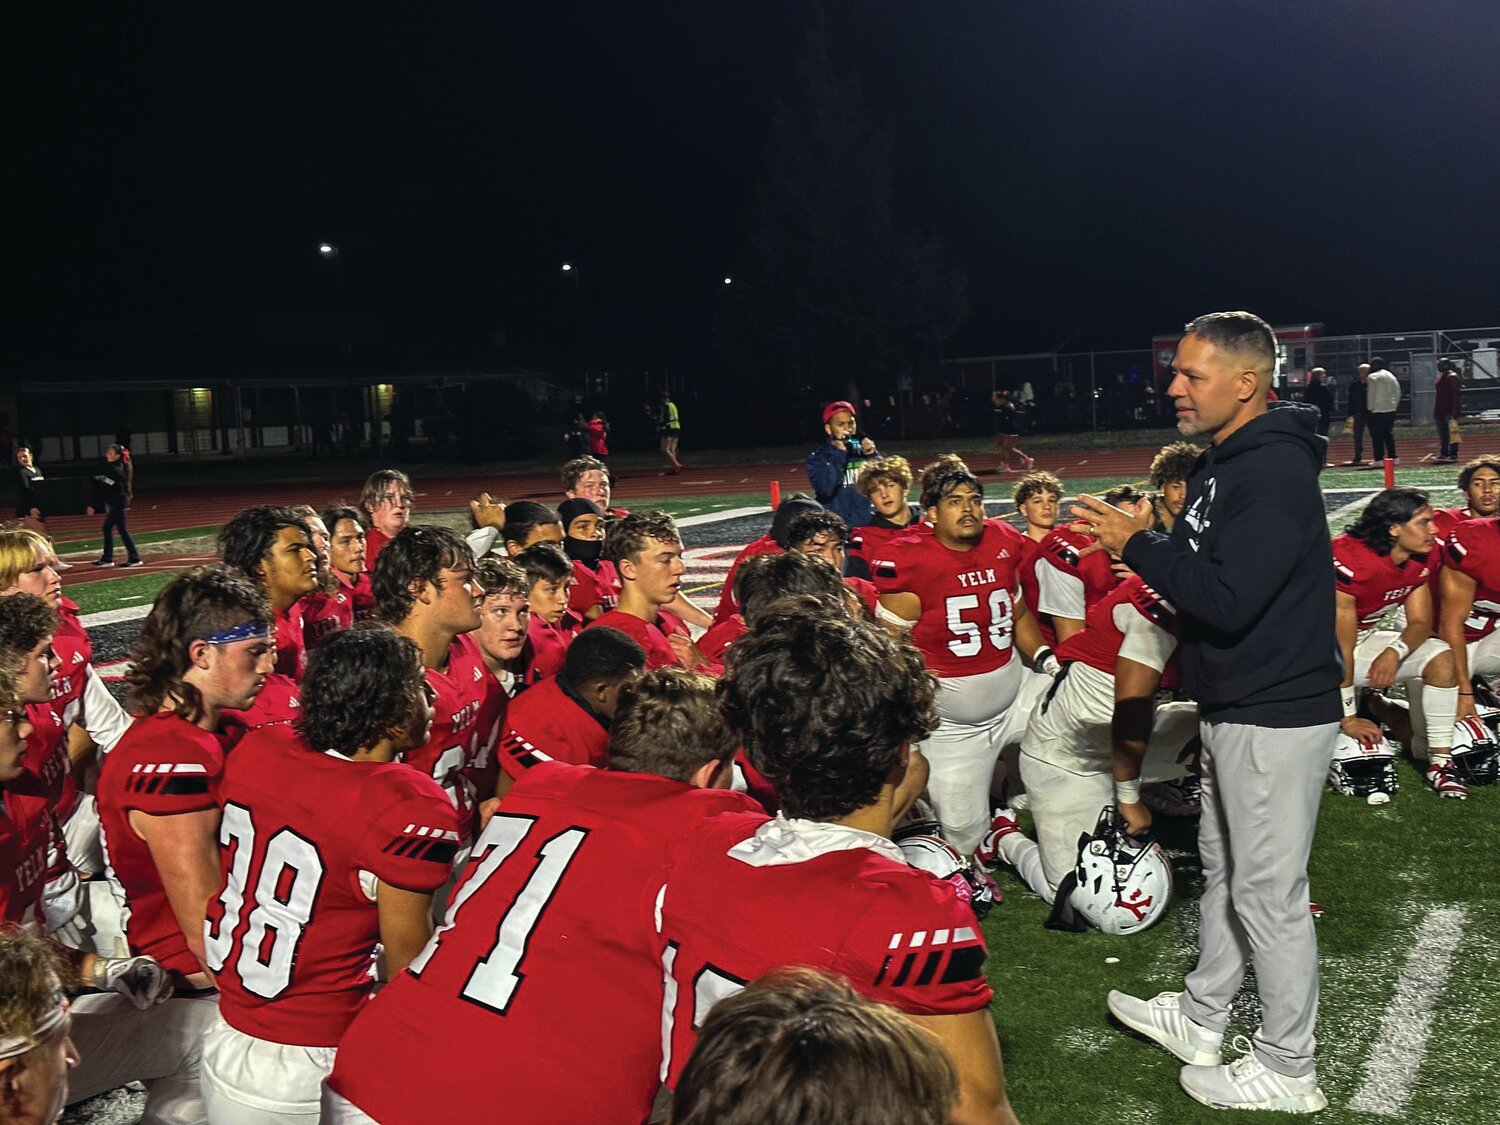 Head coach Jason Ronquillo addresses the Tornados after a 59-7 victory over the River Ridge Hawks.